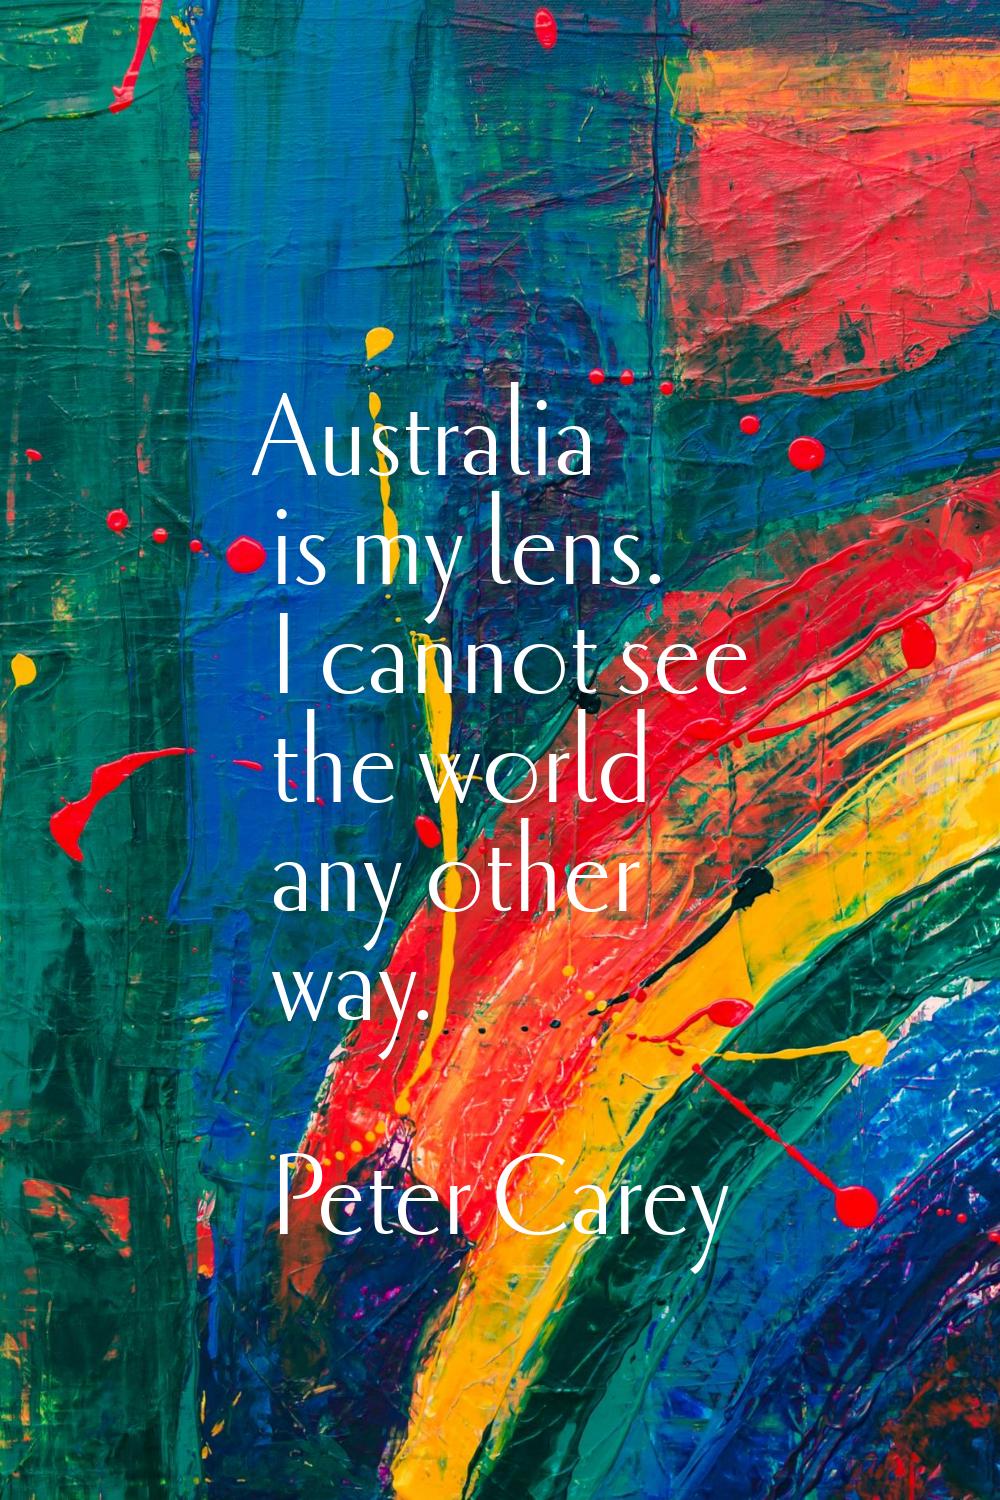 Australia is my lens. I cannot see the world any other way.